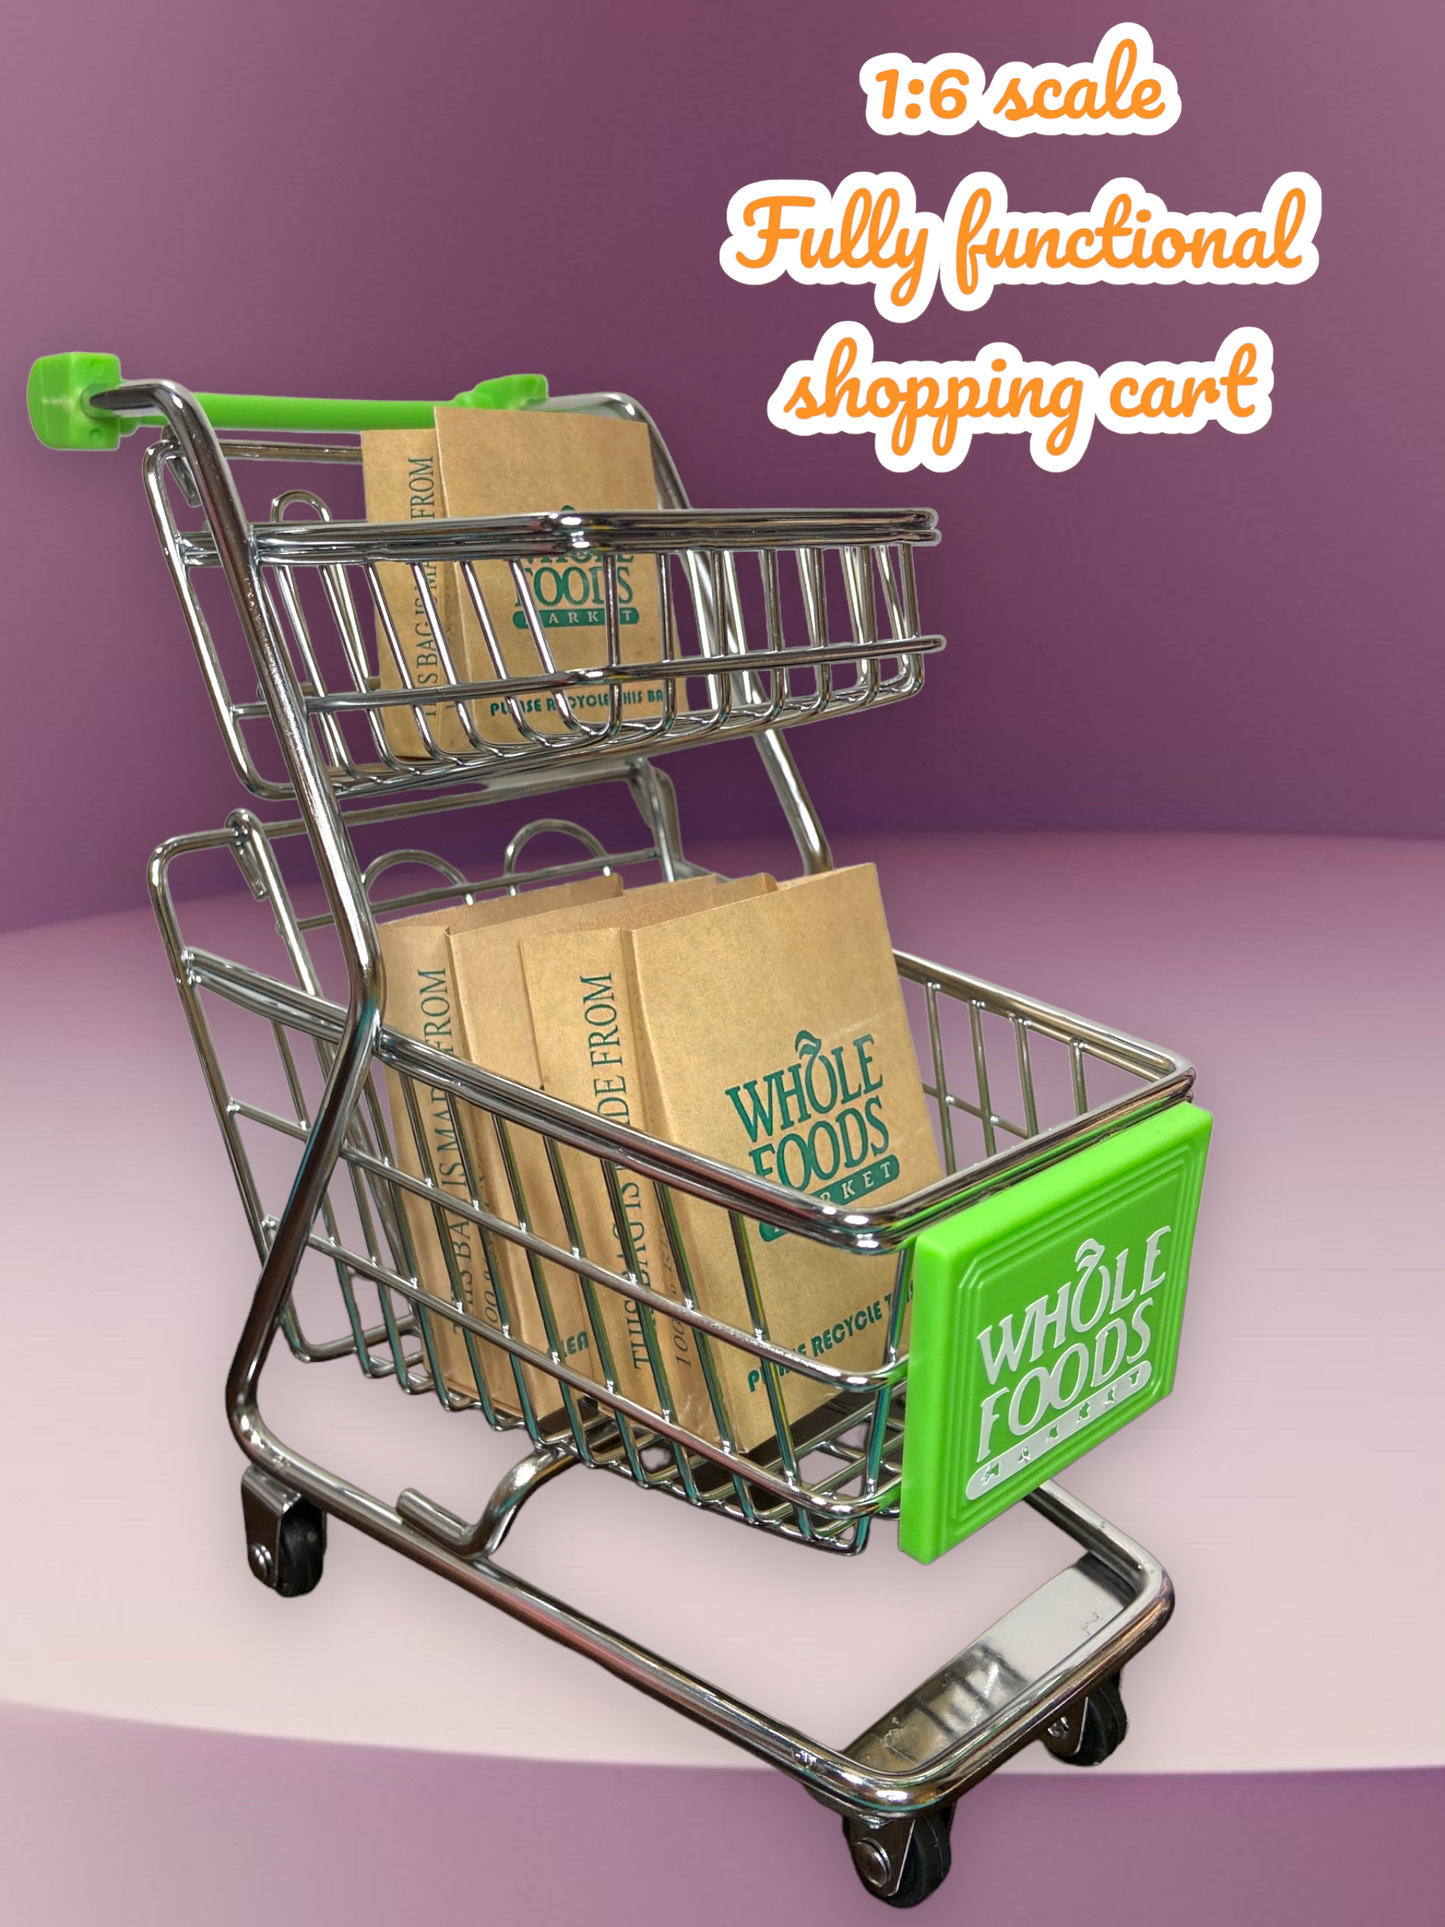 1:6 SCALE Miniature High Quality Metal Shopping Cart